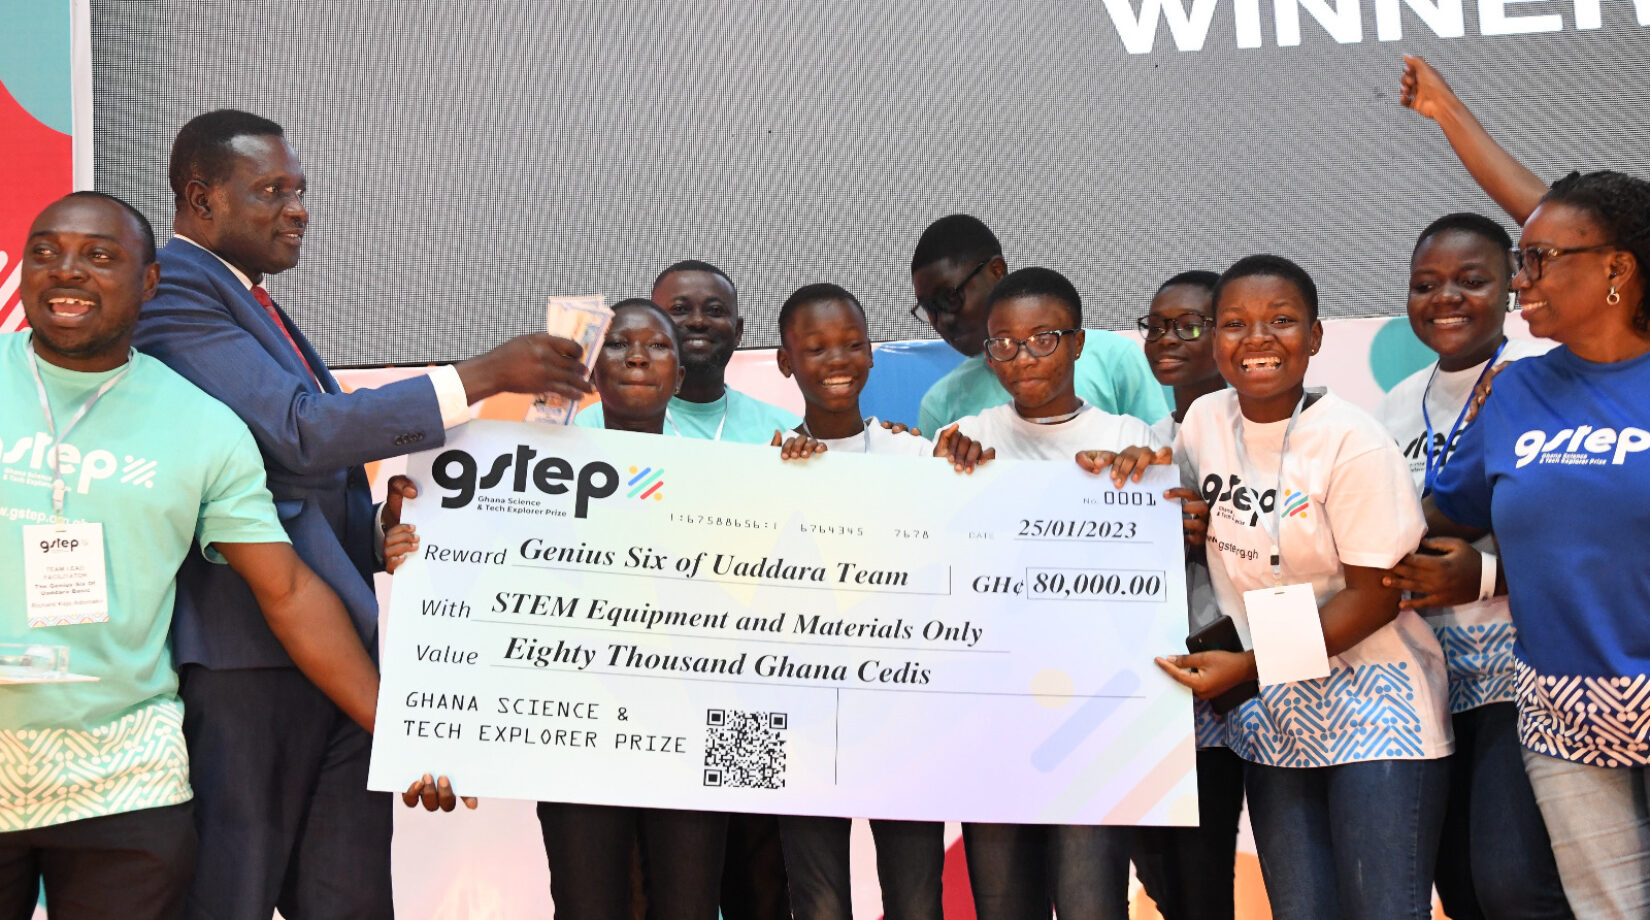 Uaddara Basic School wins maiden GSTEP competition